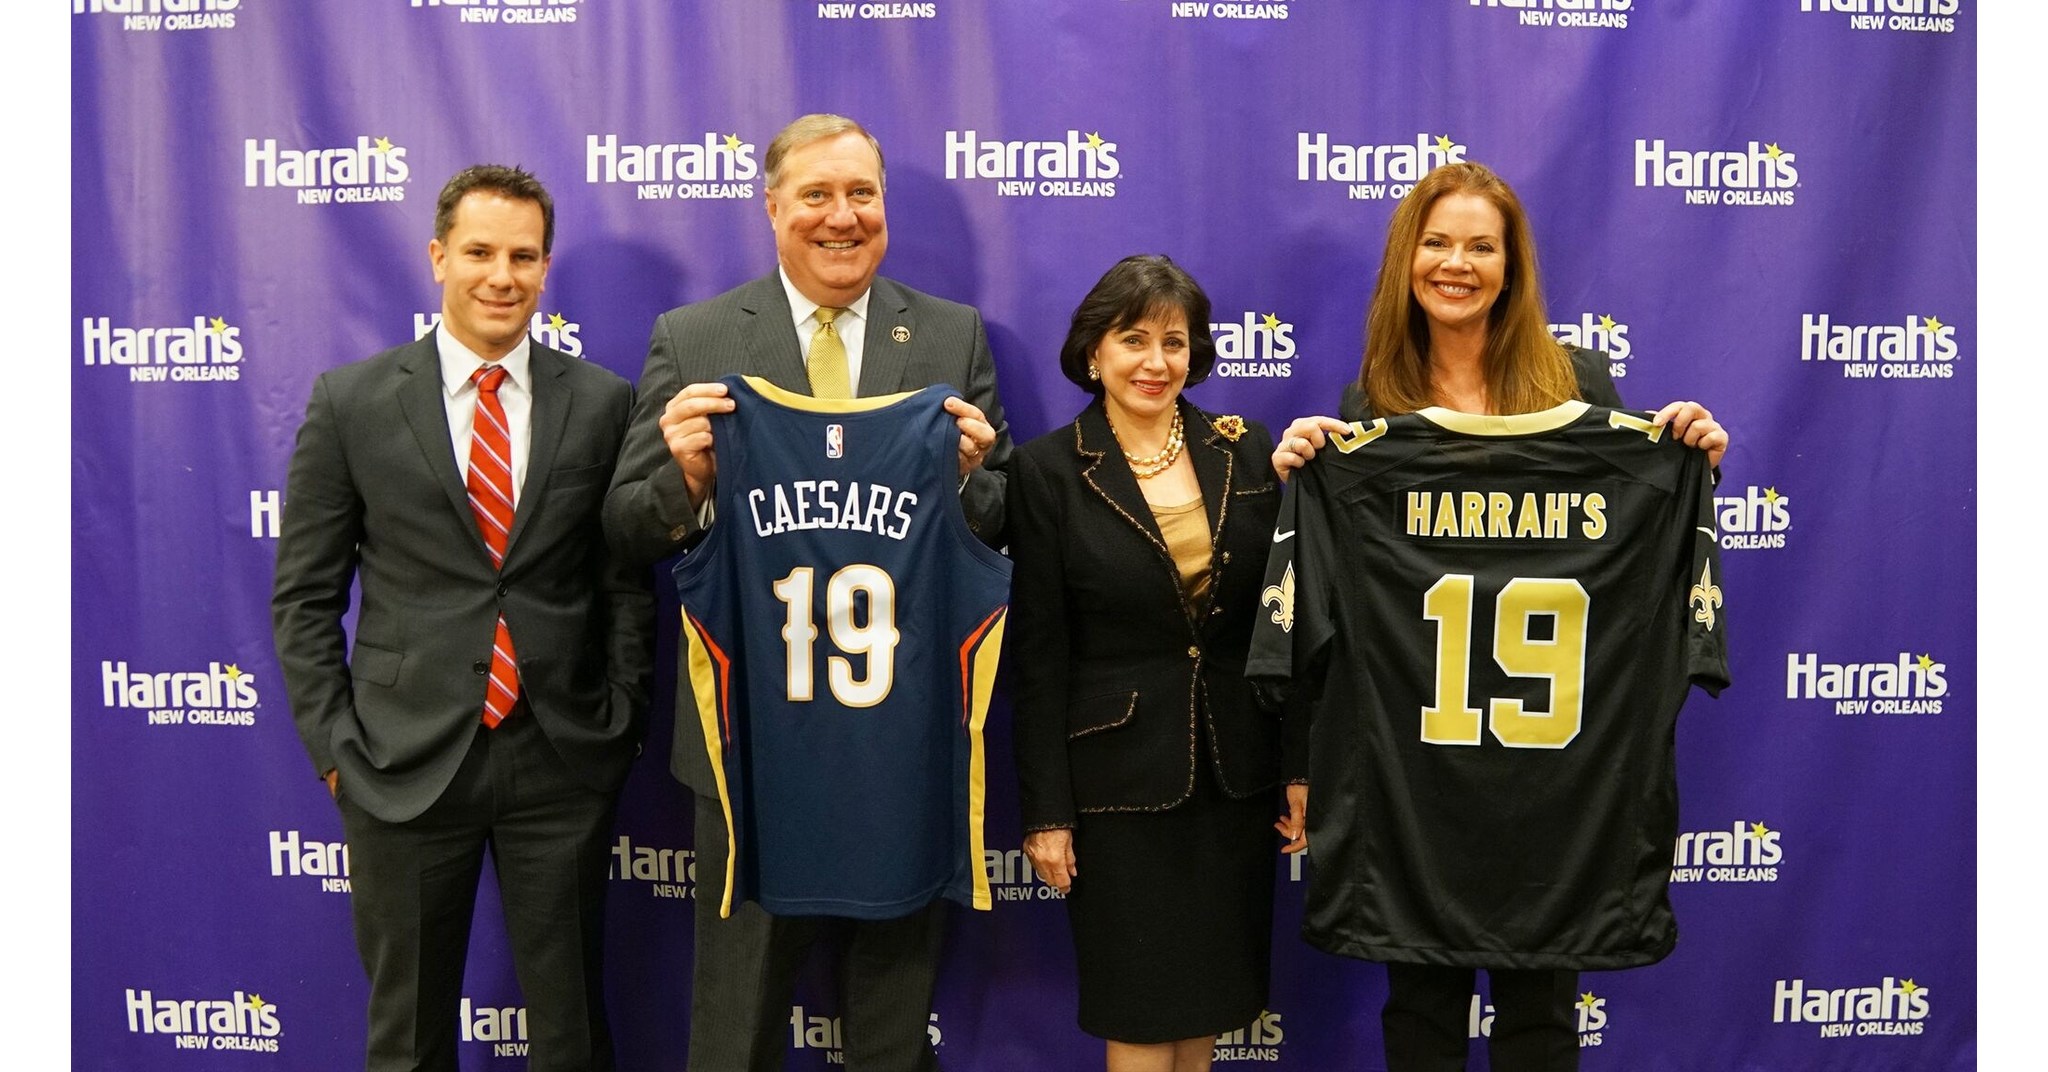 New Orleans Saints and Pelicans Select Harrah's New Orleans As